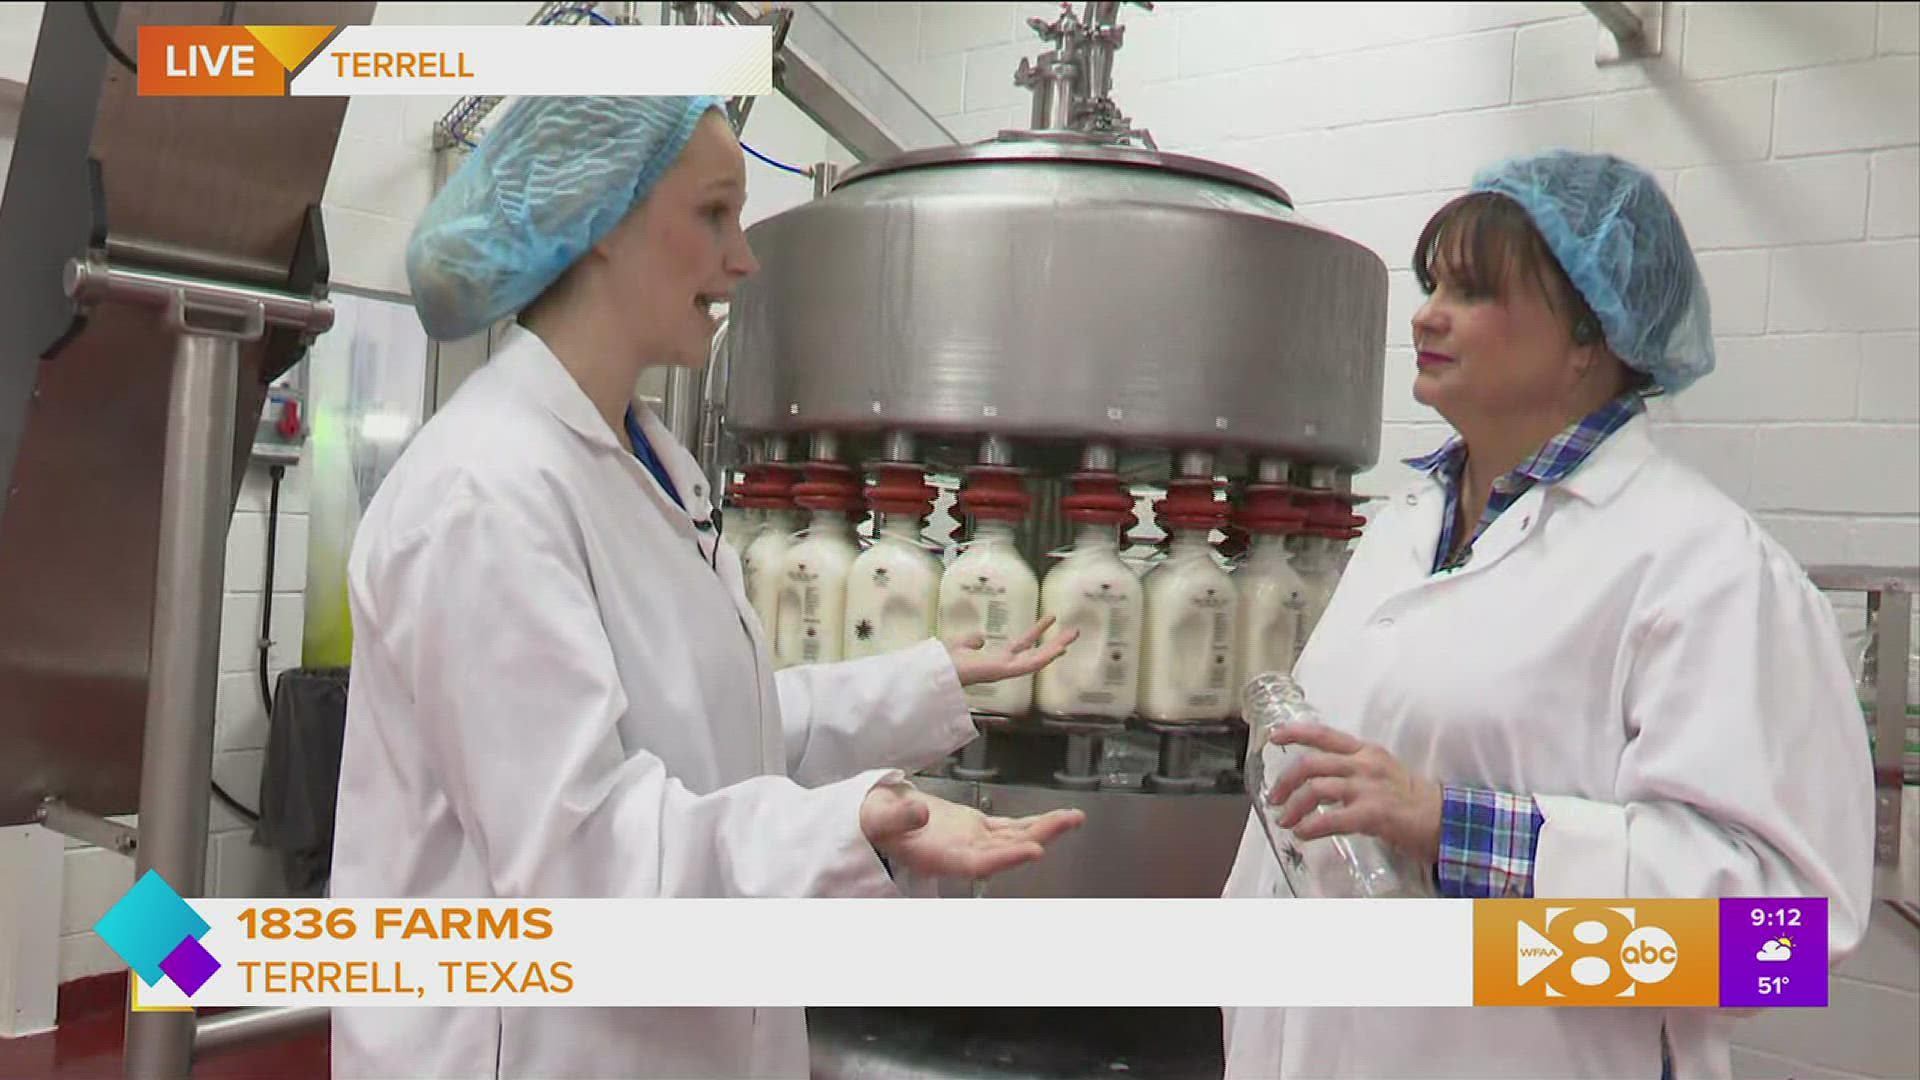 Paige is live at 1836 Farms in Terrell to see how one creamery is milking and bottling the old-fashioned way.